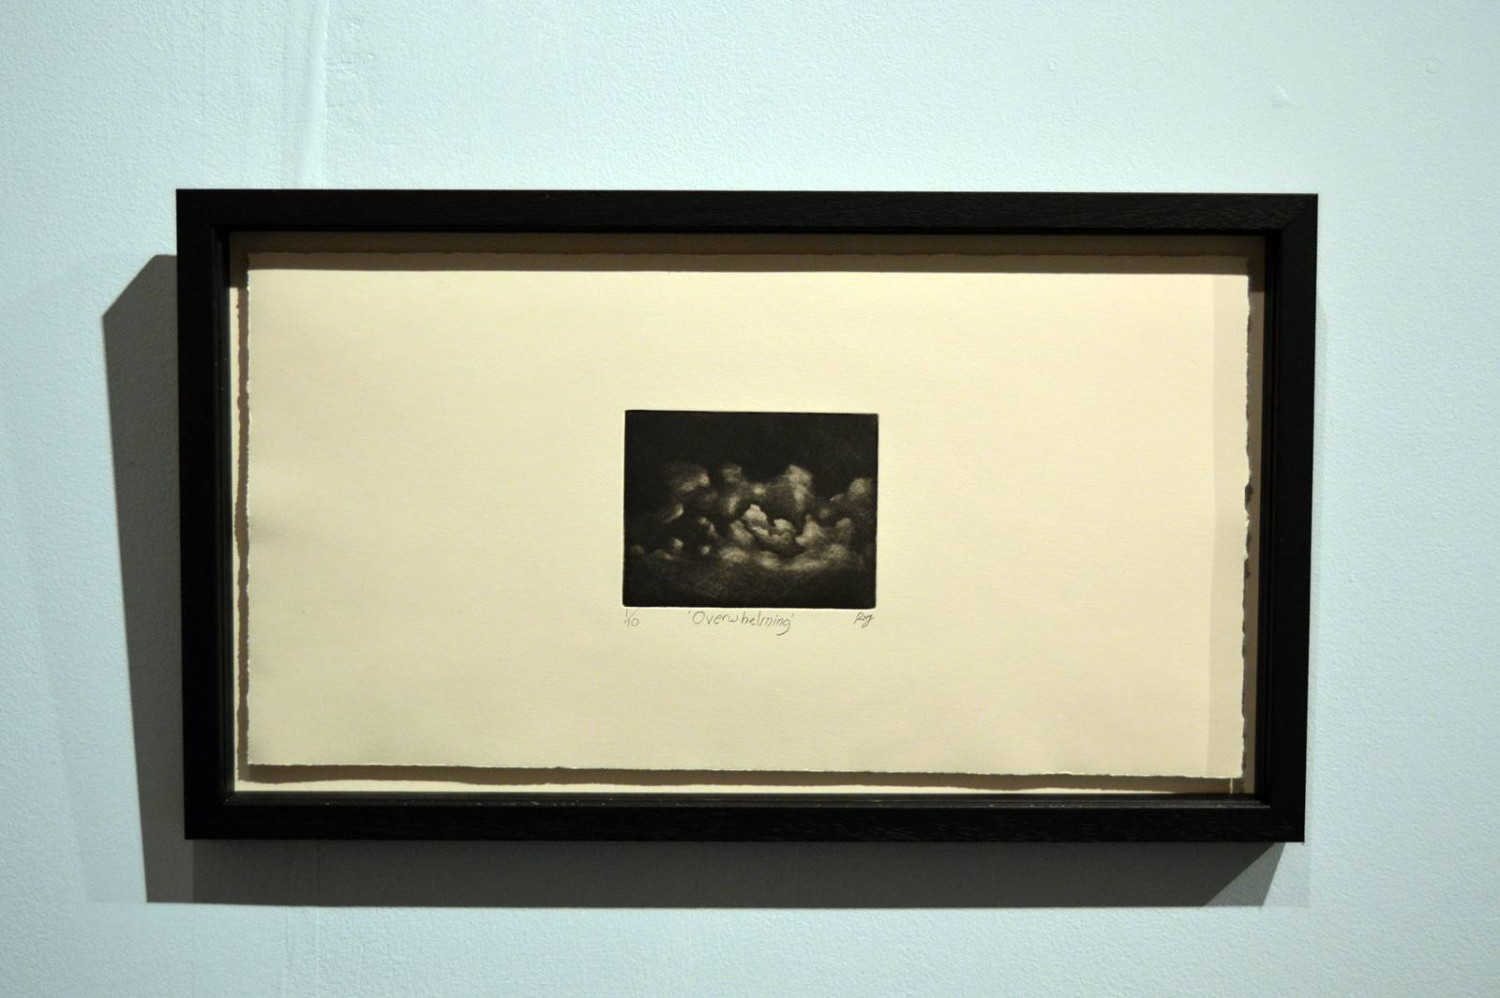 *Overwhelmed*, mezzotint etching on Fabriano paper, 20 x 40cm